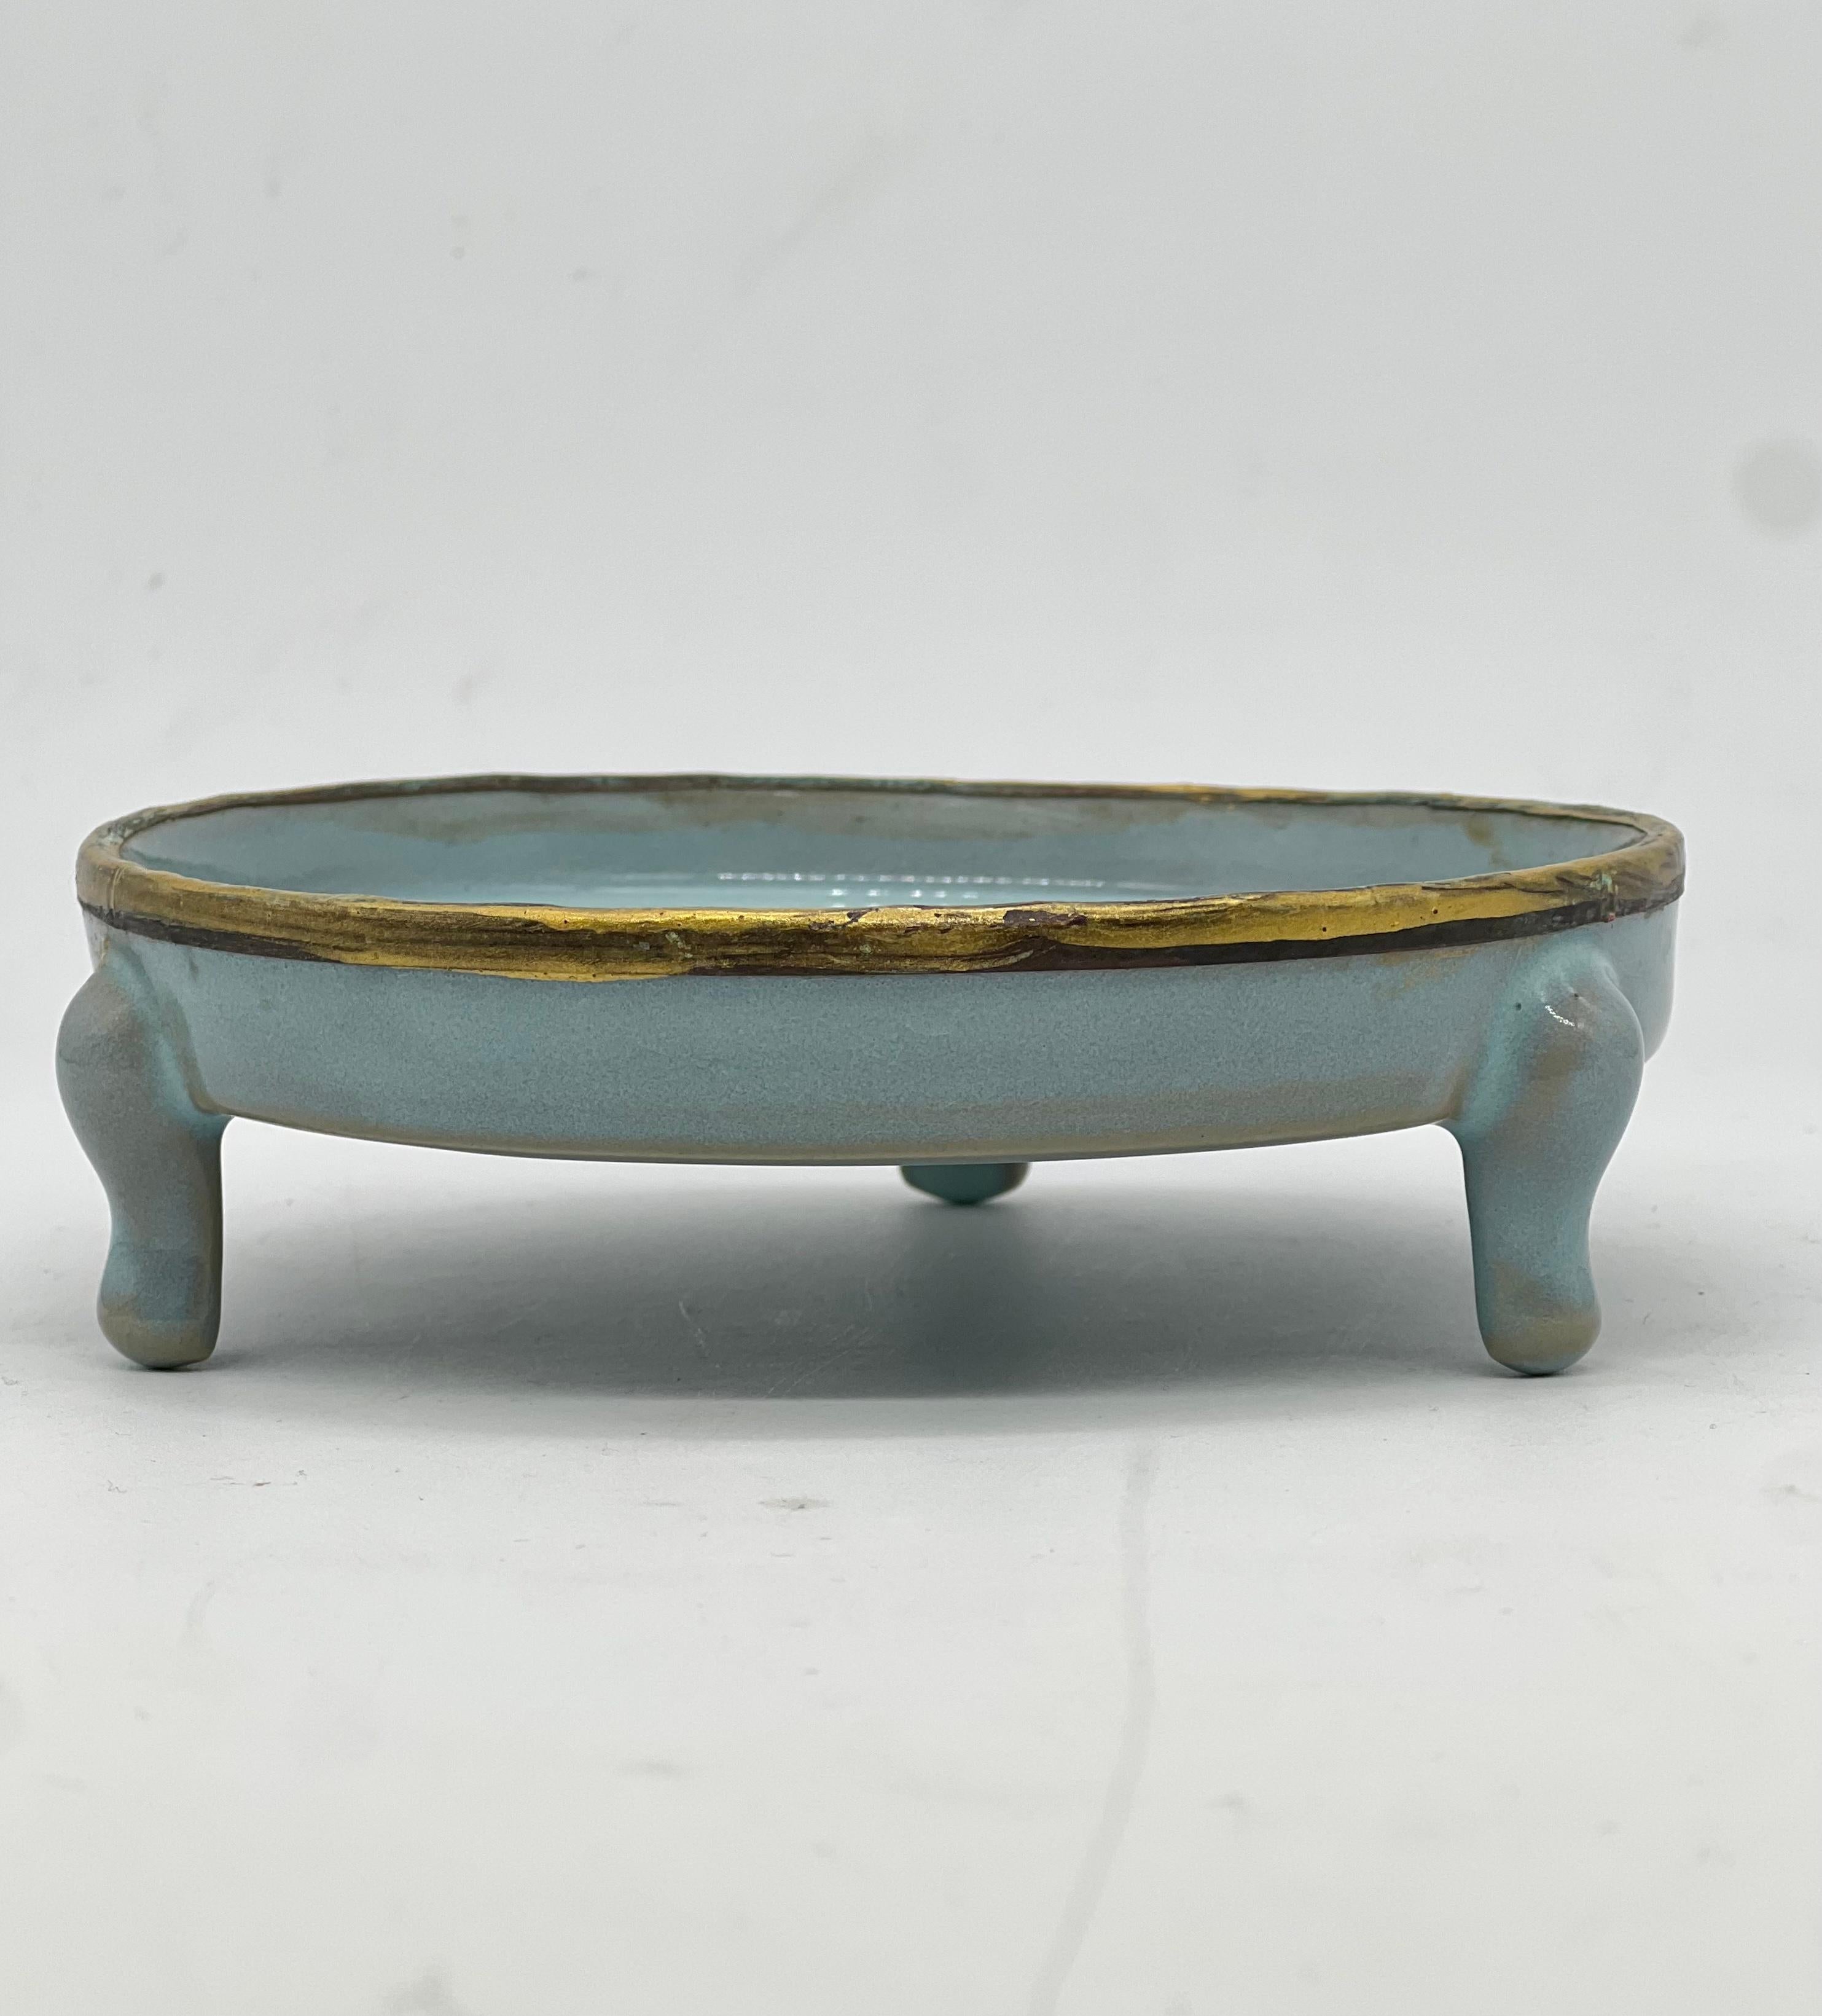 Ceramic A FINE 19th C CHINESE THREE LEGGED RU WARE PORCELAIN WASHER/STAND.Qing Dynasty. For Sale